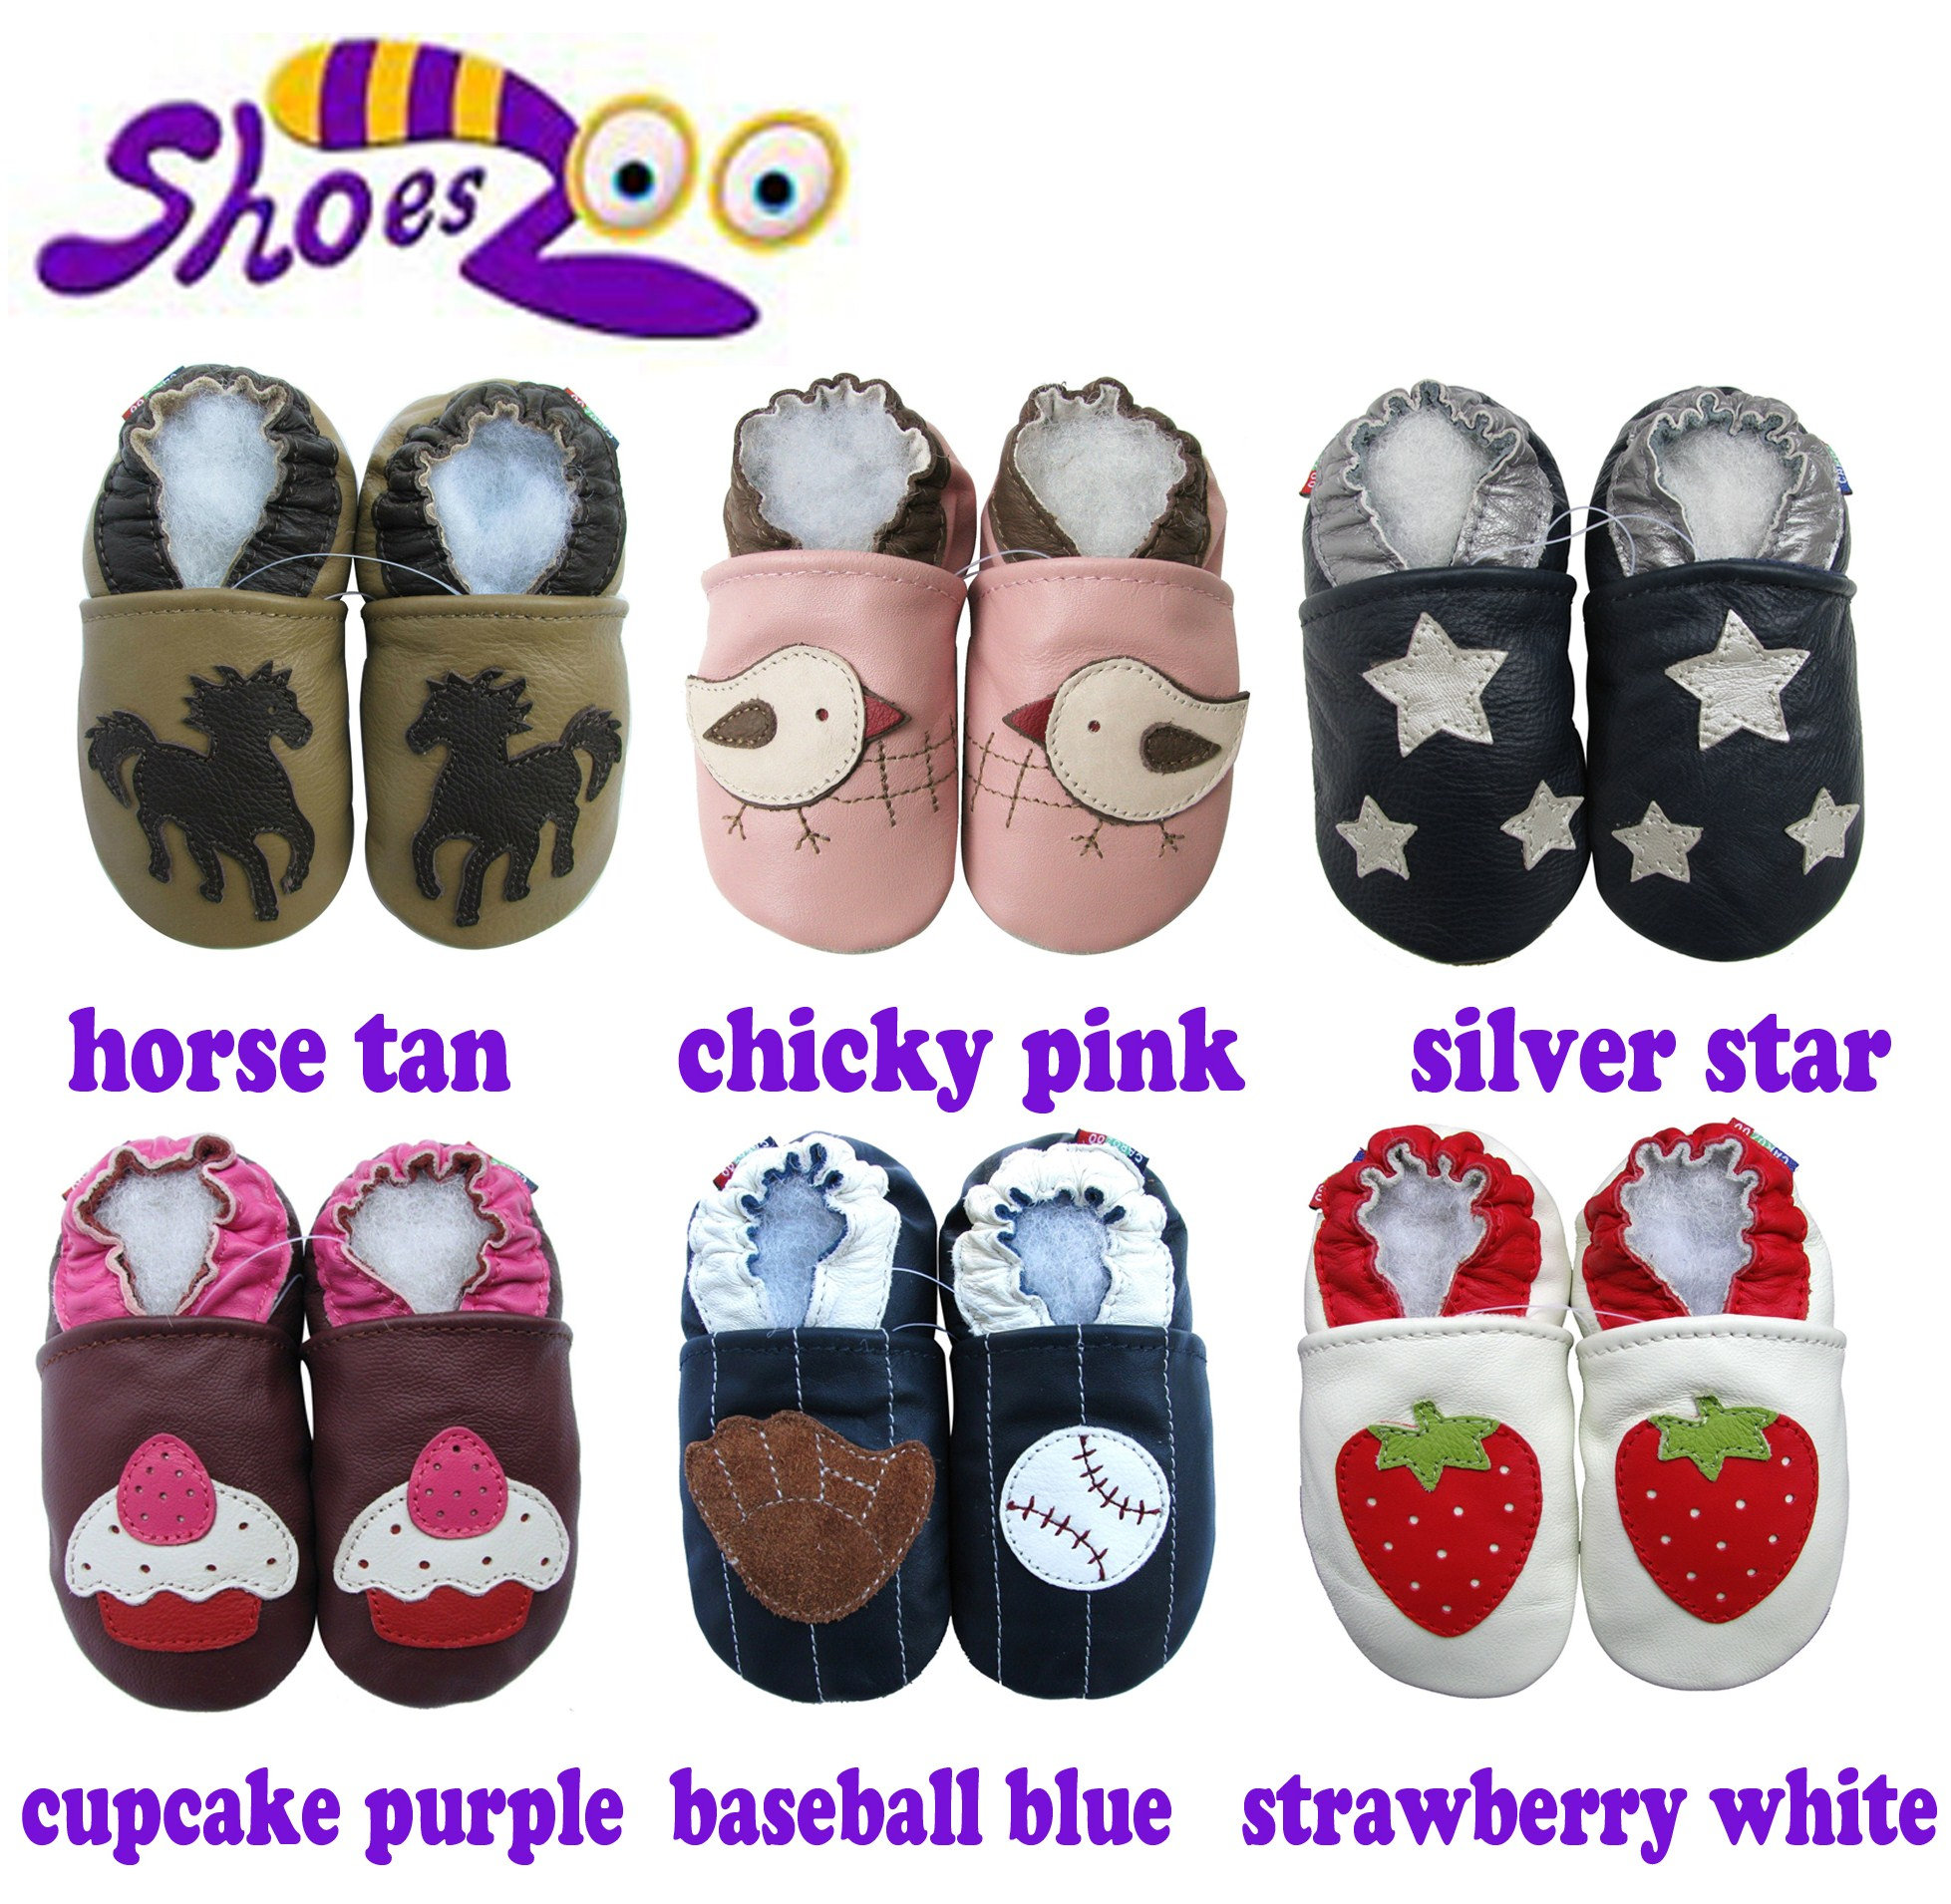 Baby Slippers Girls and Boys Clearance: Carozoo Toddler Leather Soft Sole Shoes Baby Leather Shoes Toddler Shoes for Boys /& Girls.